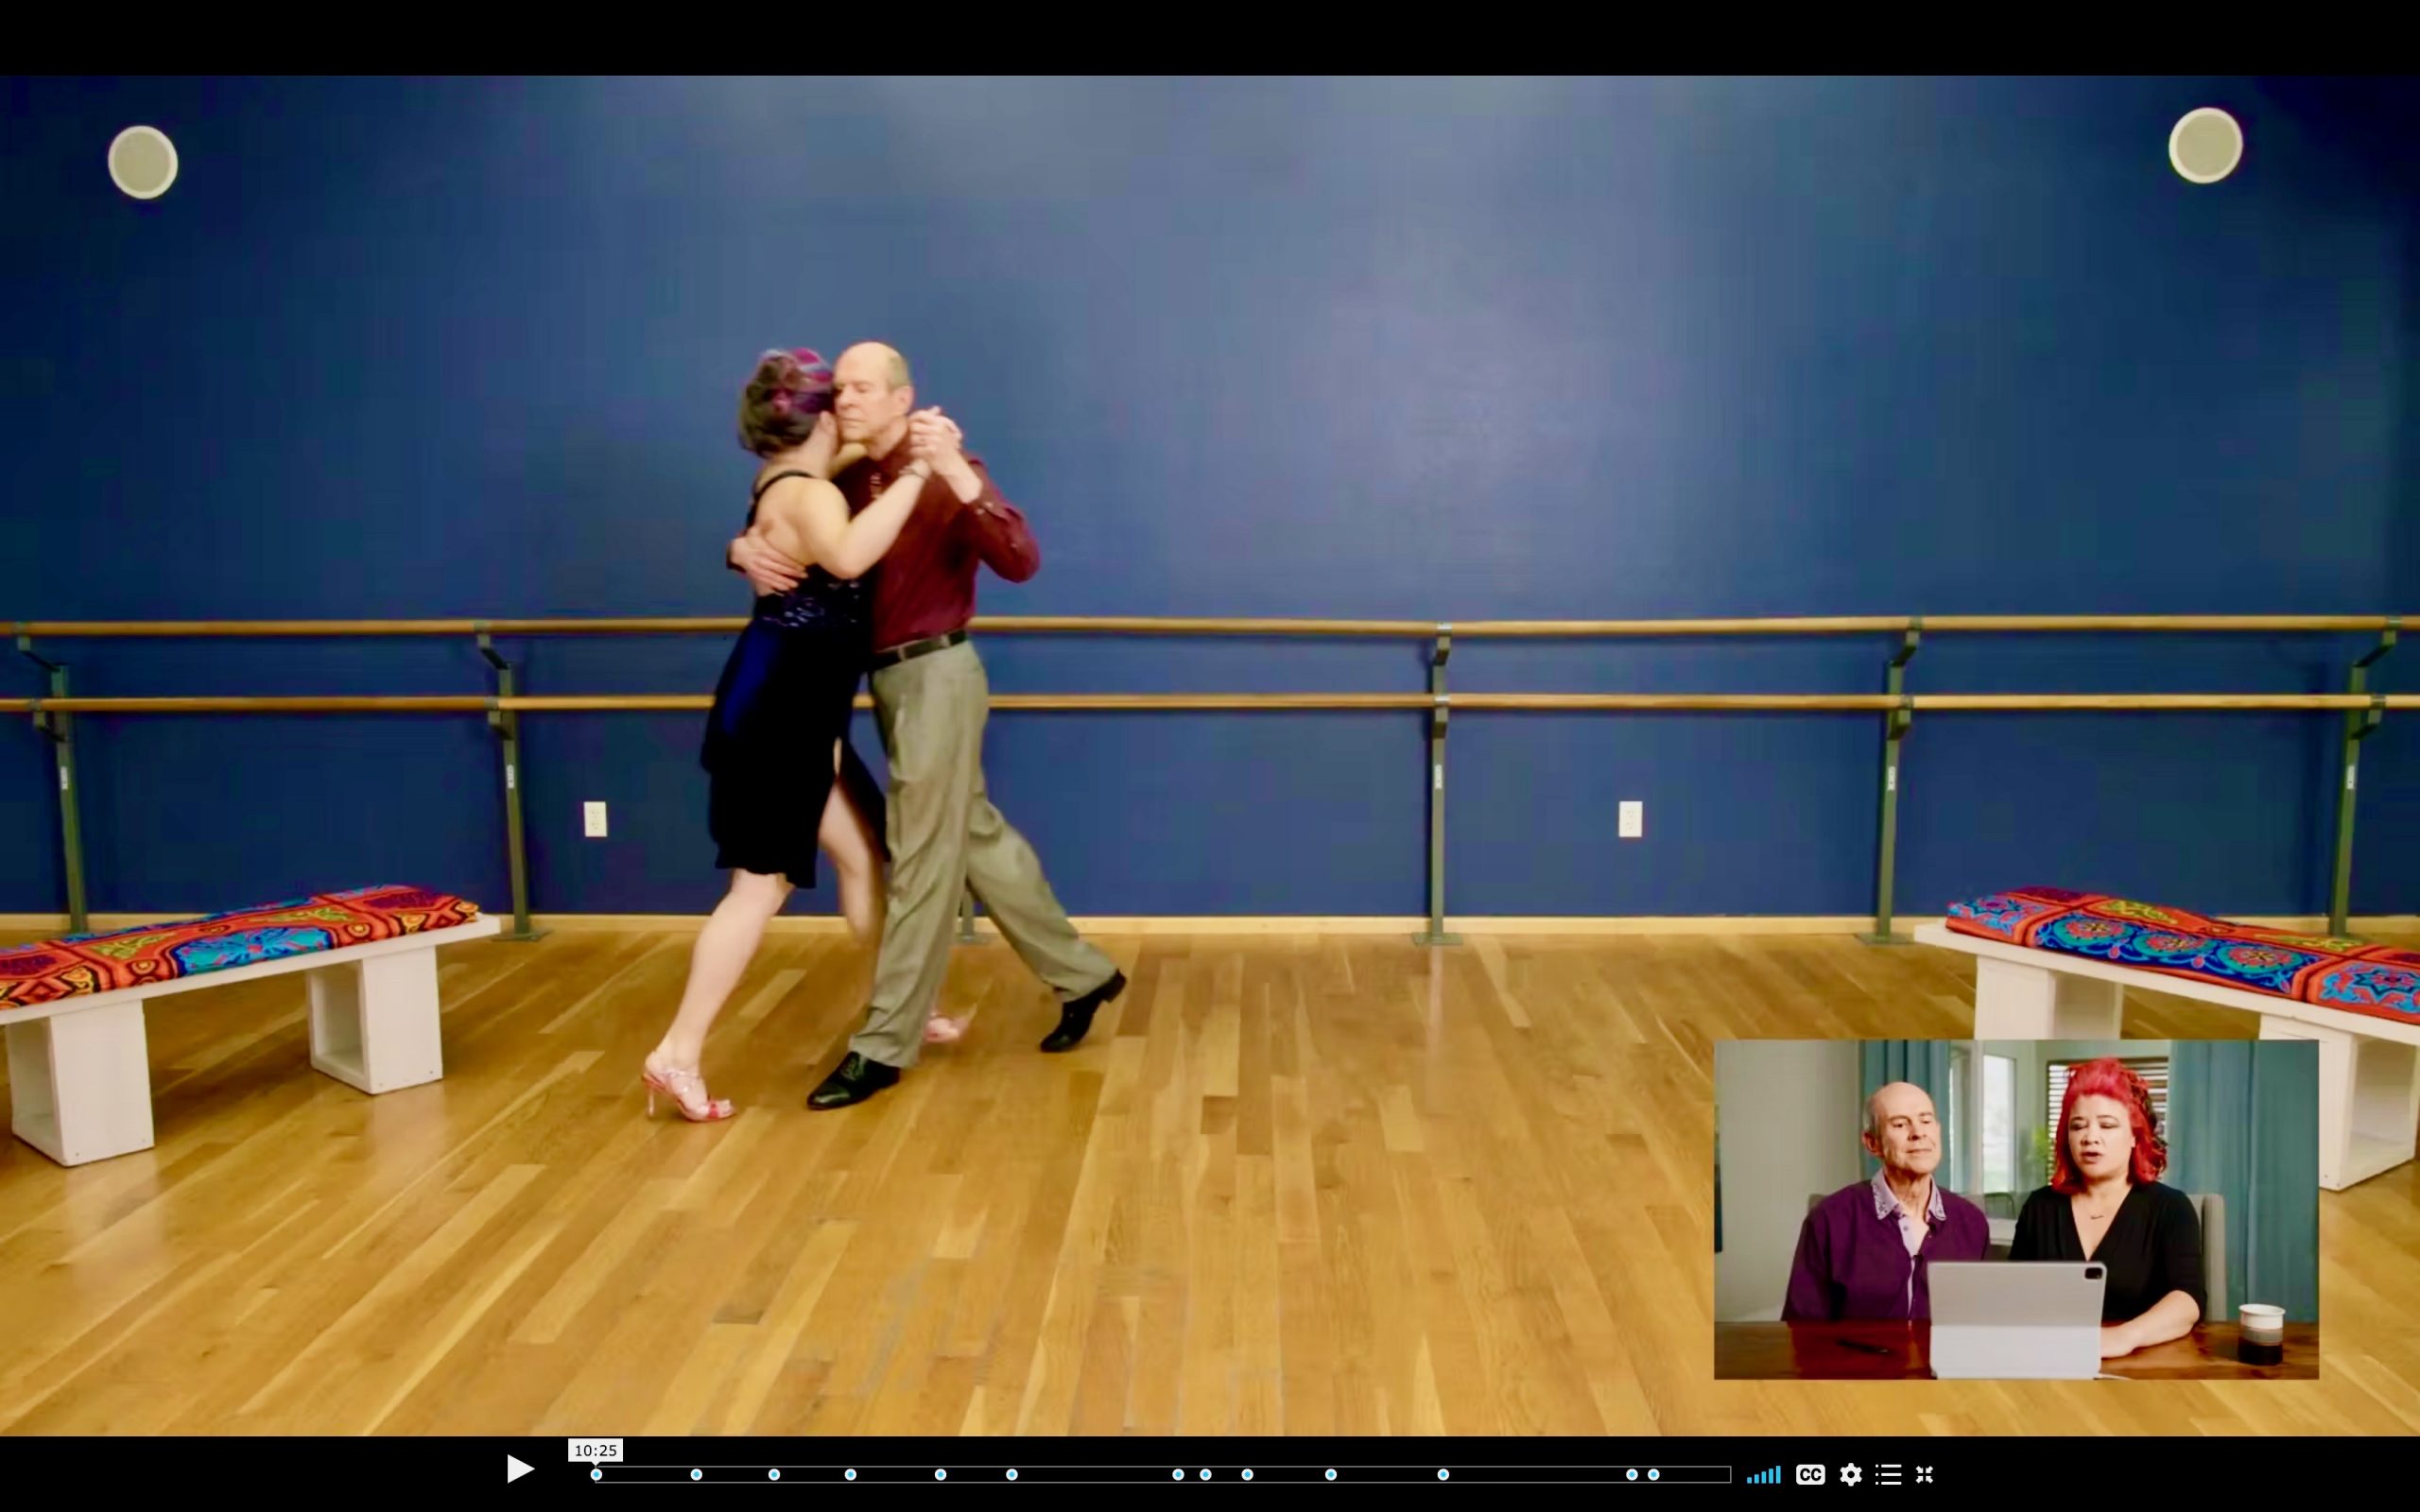 Argen and Tina in an inset picture-in-picture, commenting on their dancing in the full-size picture